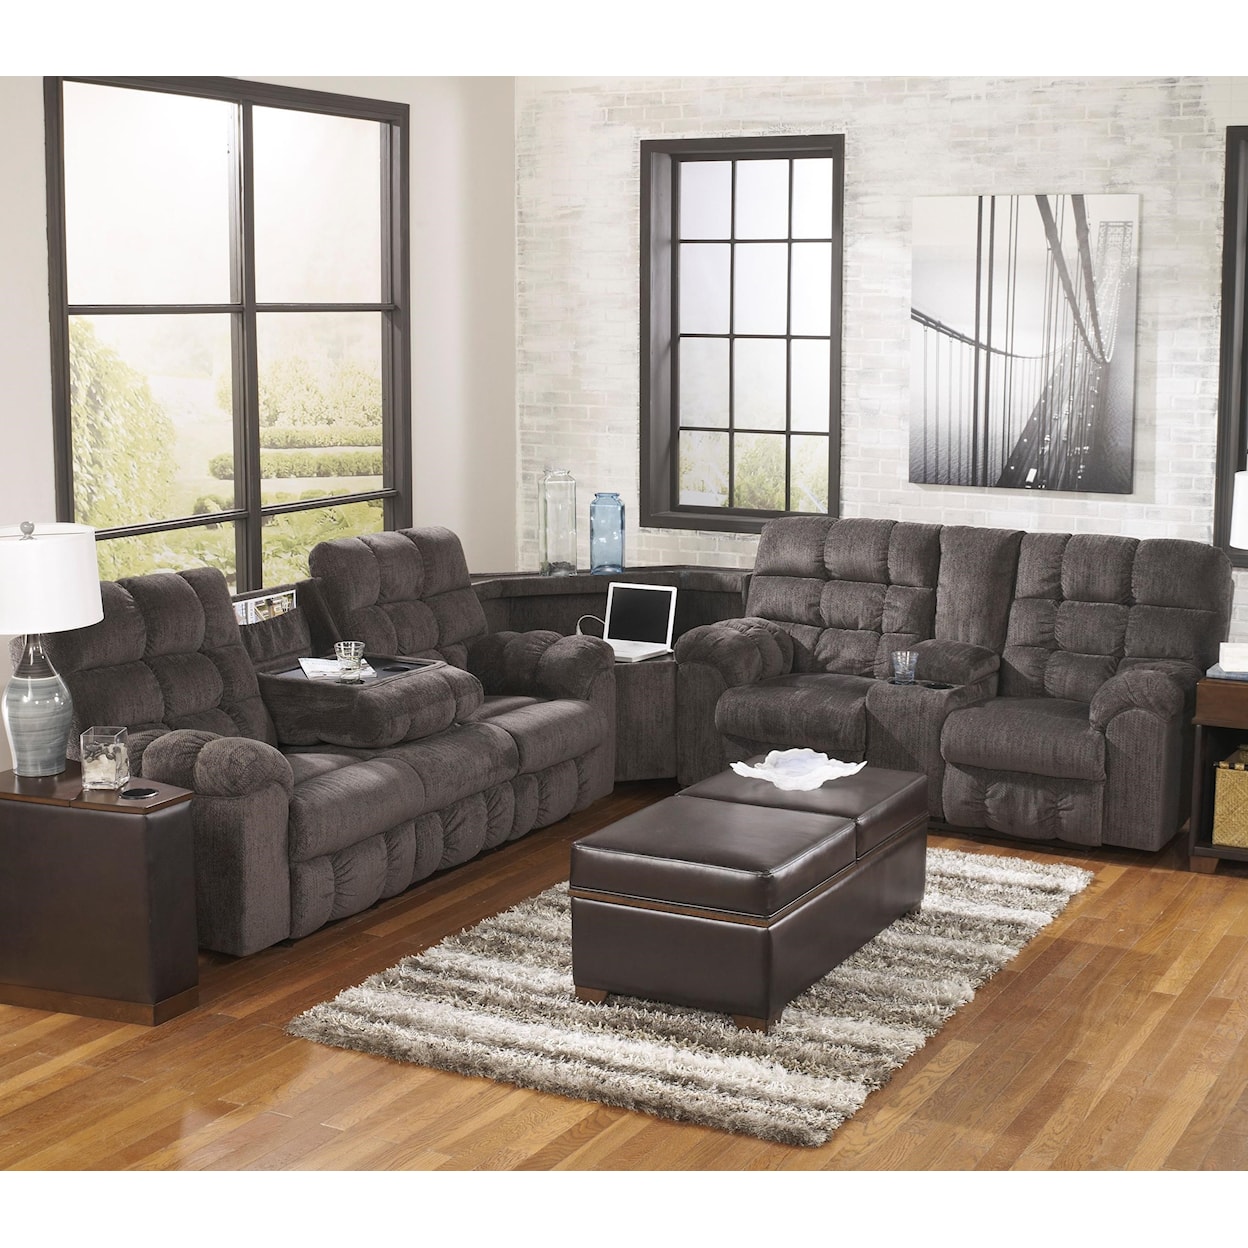 Signature Design Acieona Reclining Sectional with Right Side Loveseat